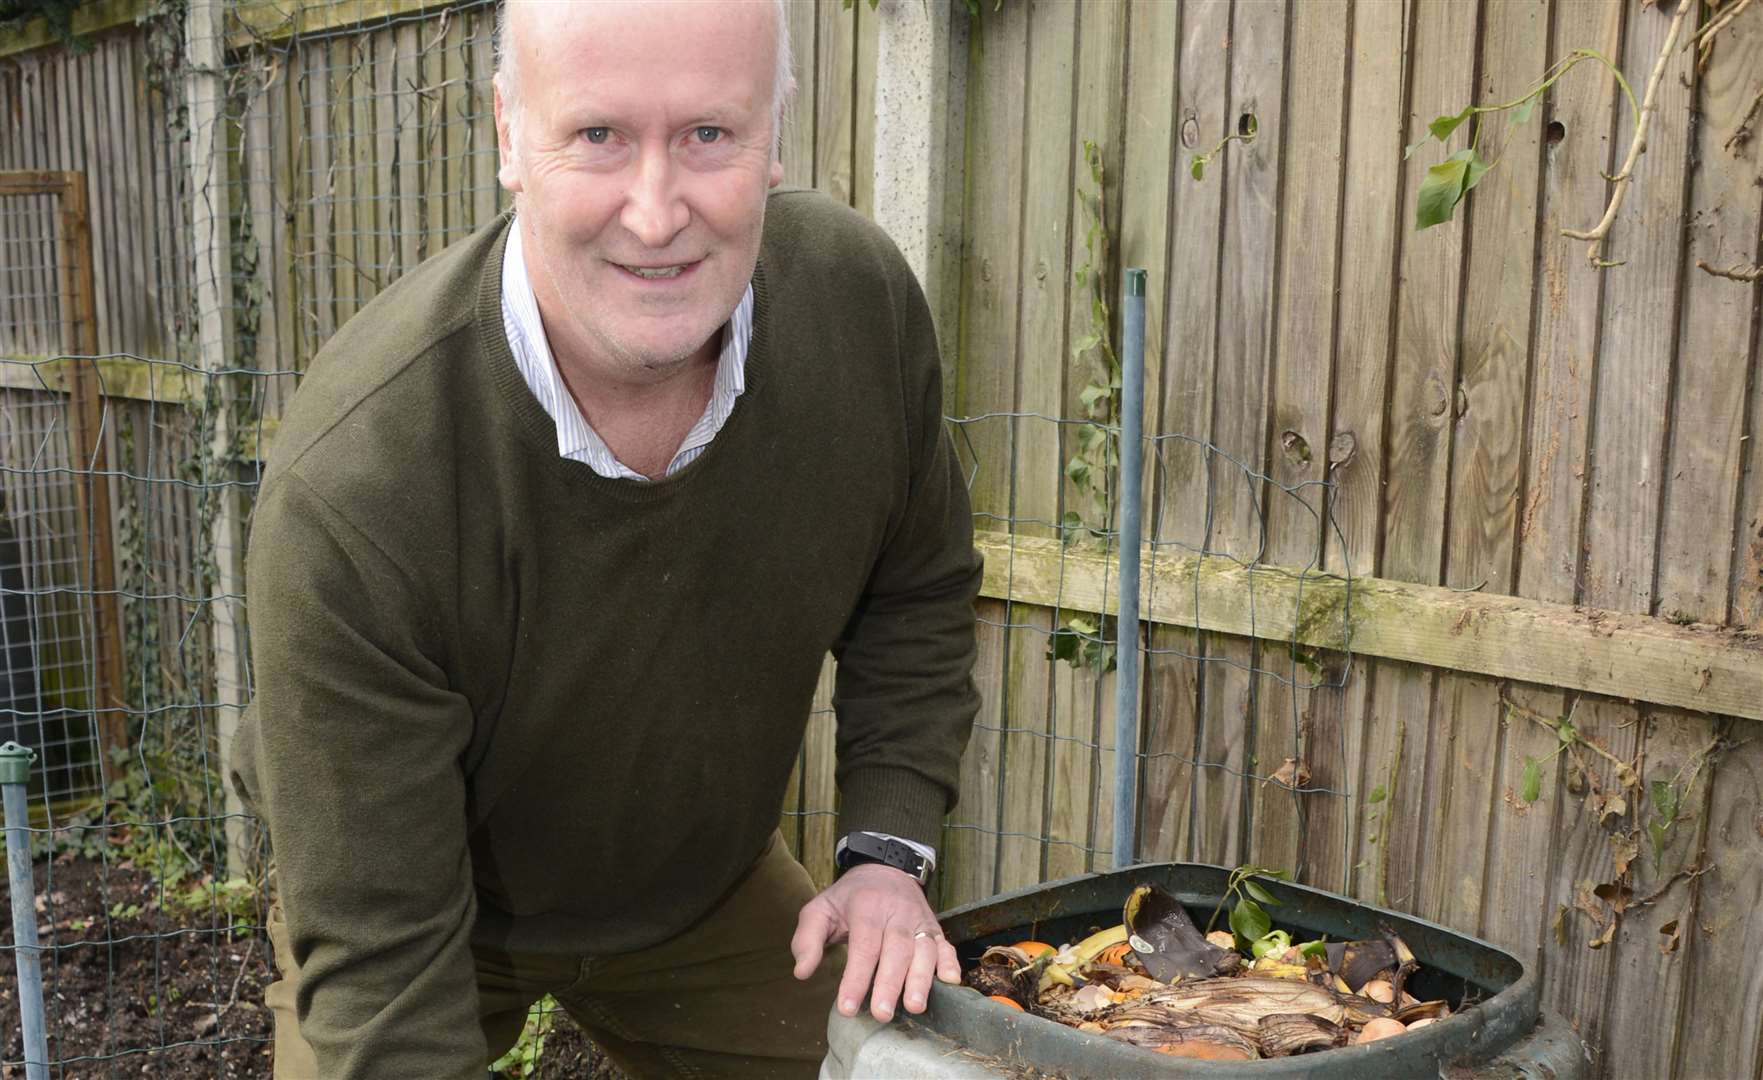 Cllr Clark says composting should be the norm